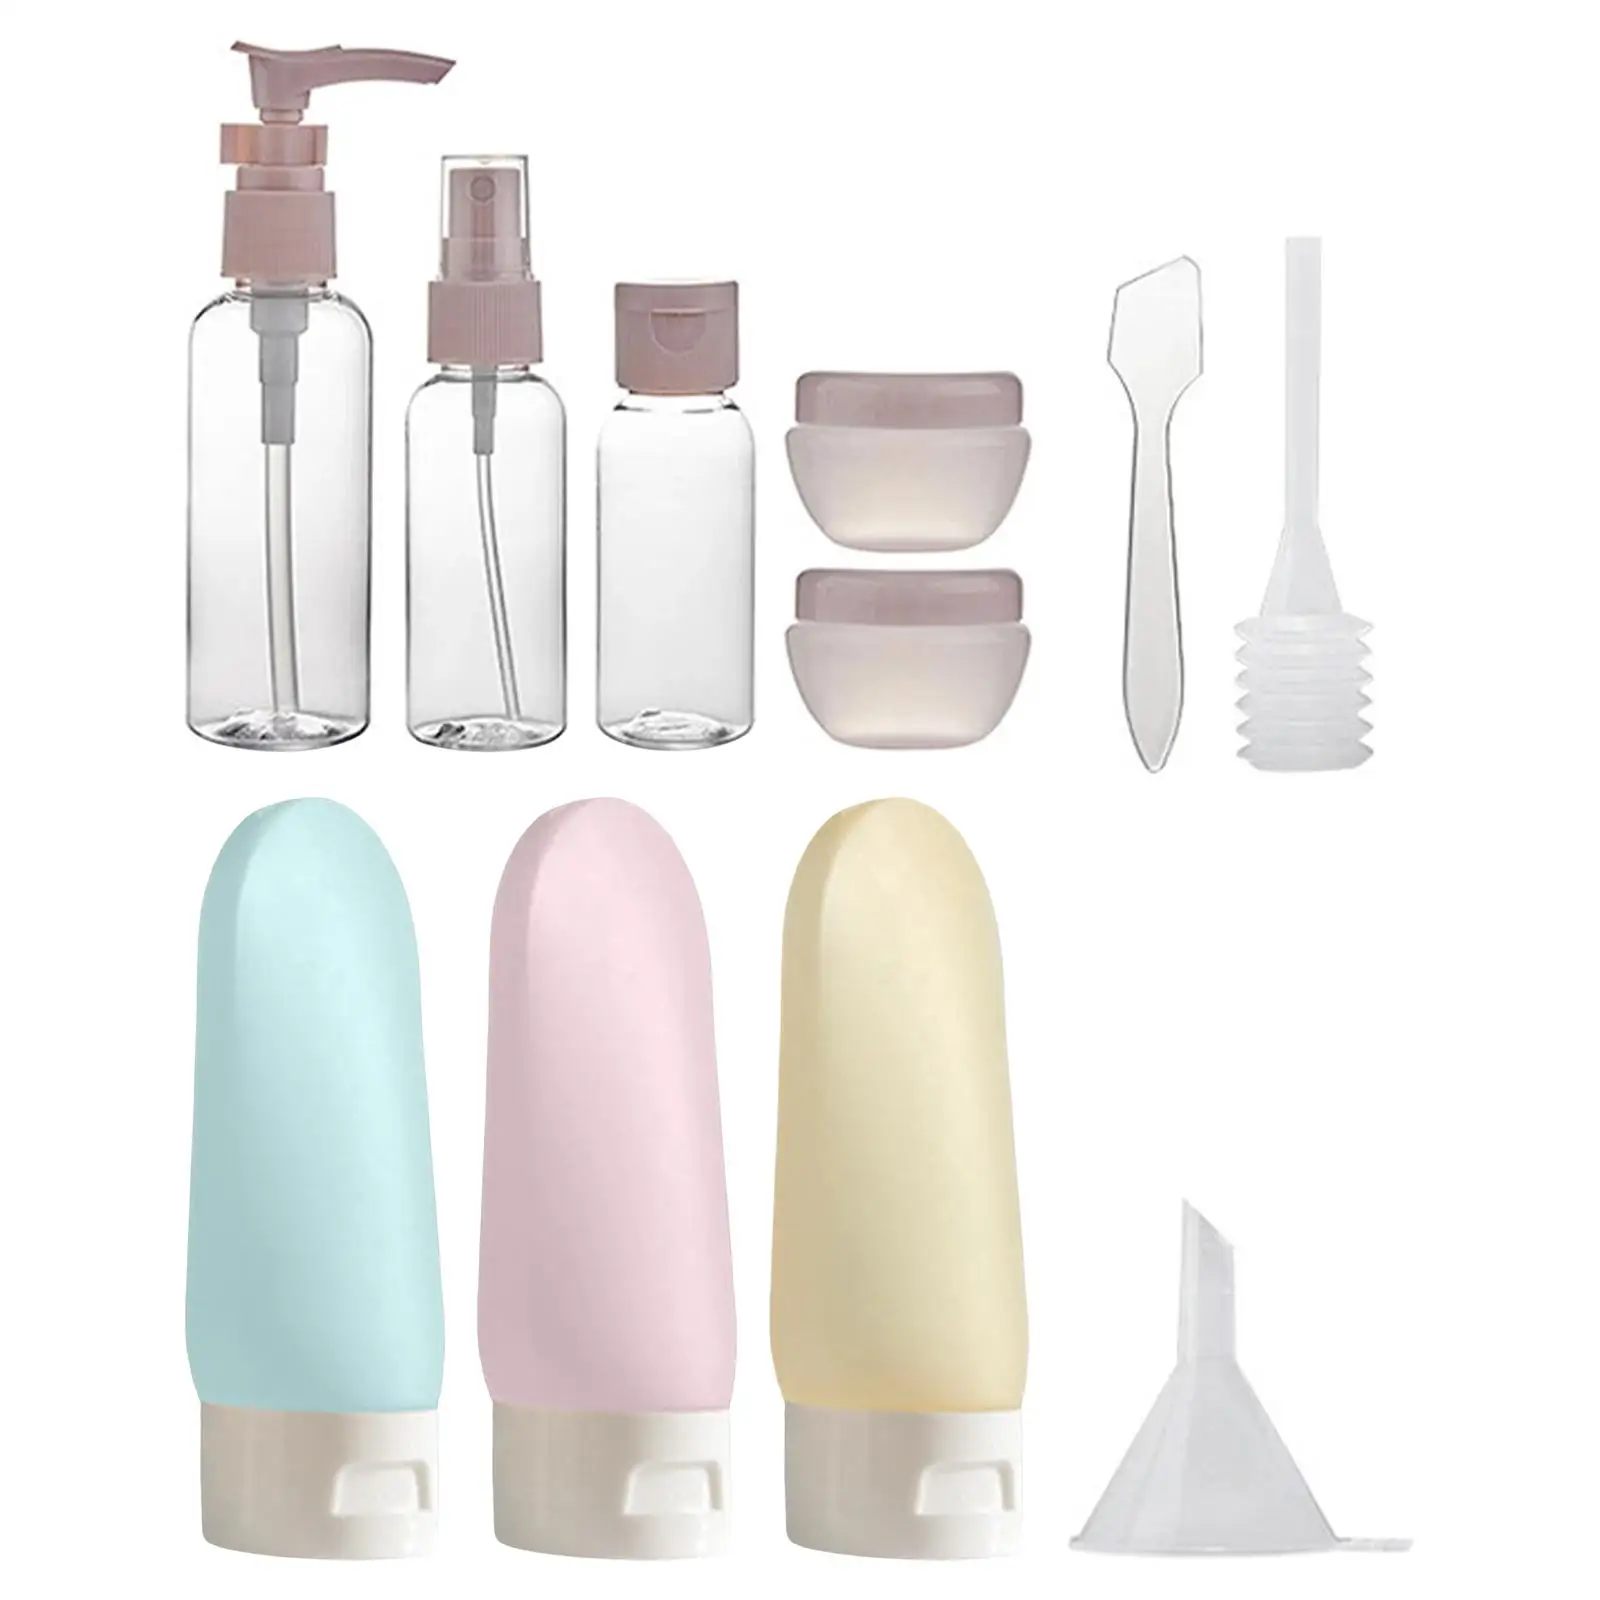 Squeezable Travel Accessories 11 Travel Bottles Refillable Shampoo Bottles Toiletries Set for Outdoor Female Child Camping Gym